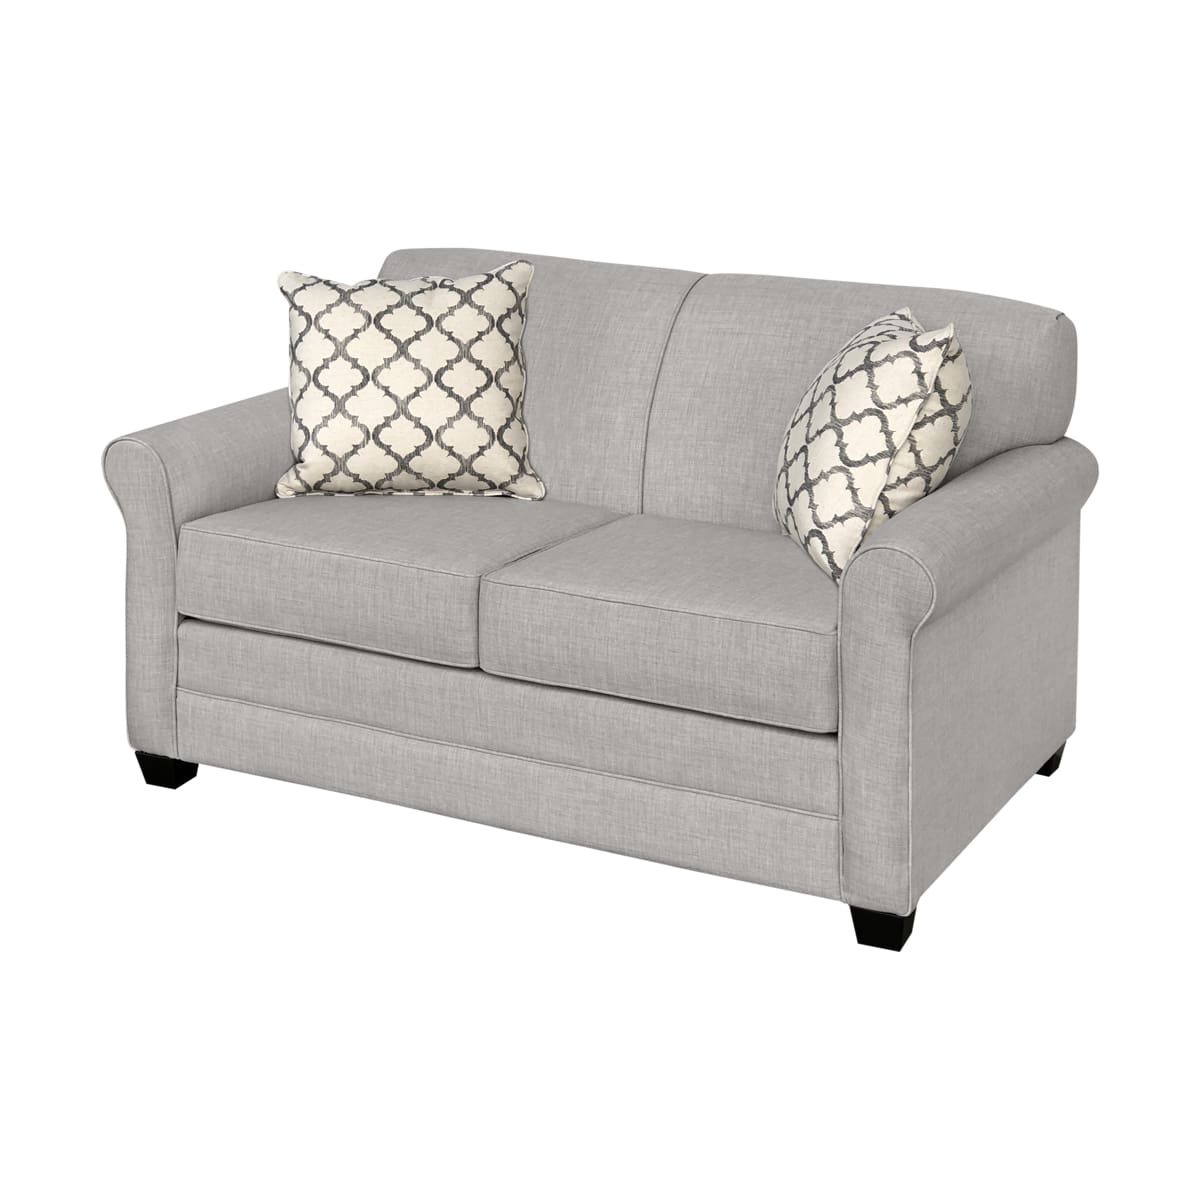 Victor Sofa Bed - Sofabed